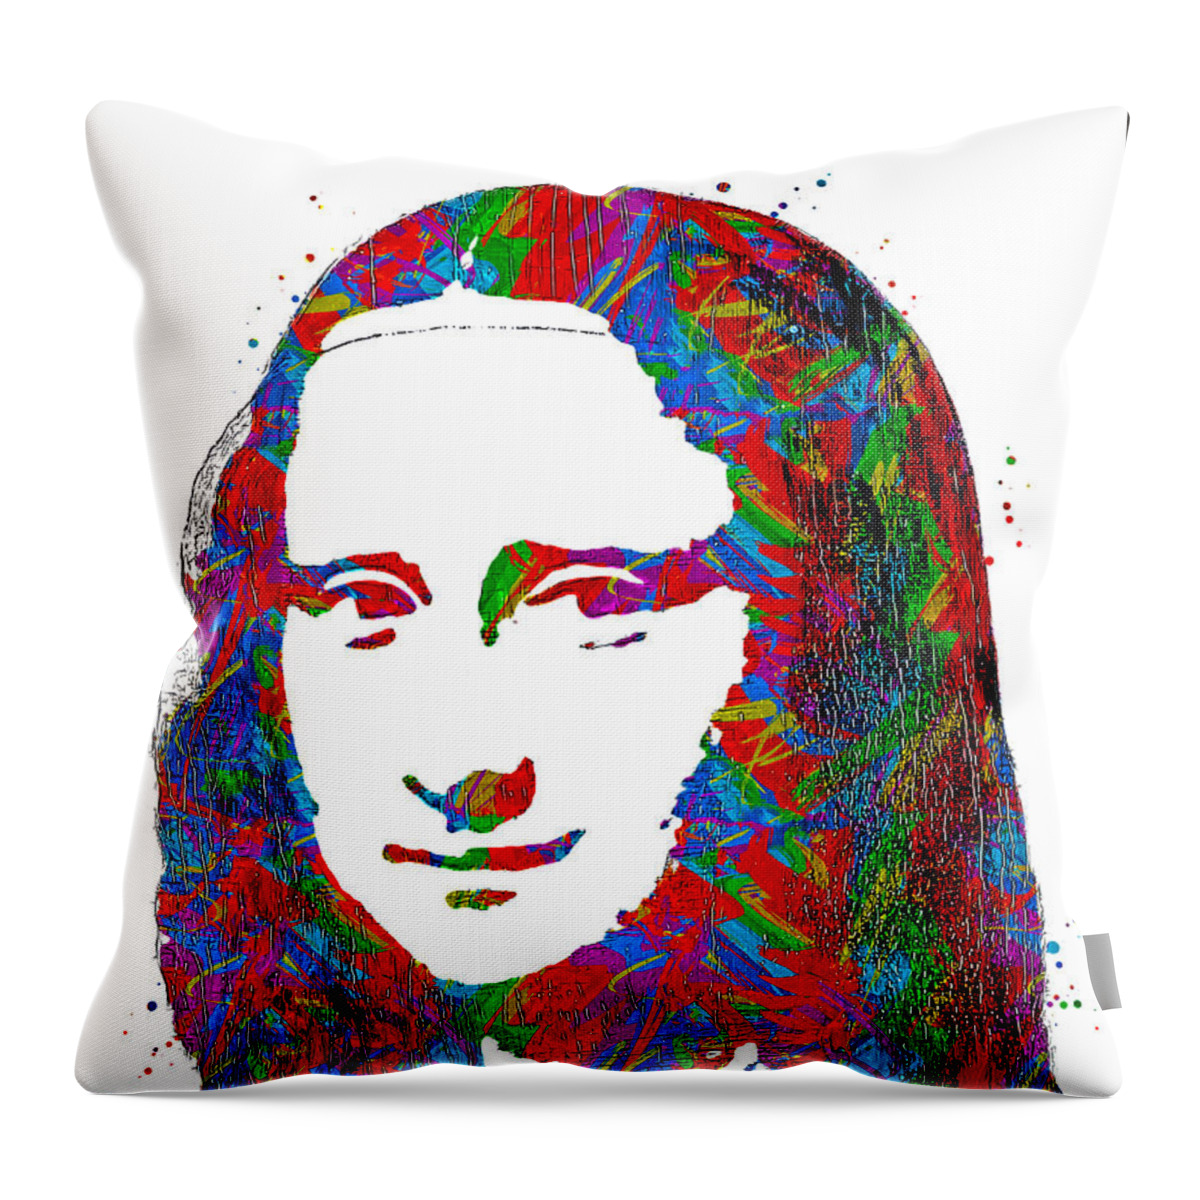 Mona Lisa Throw Pillow featuring the digital art Simple Mona Lisa colorful portrait with greens, reds and blues on white background by Nicko Prints